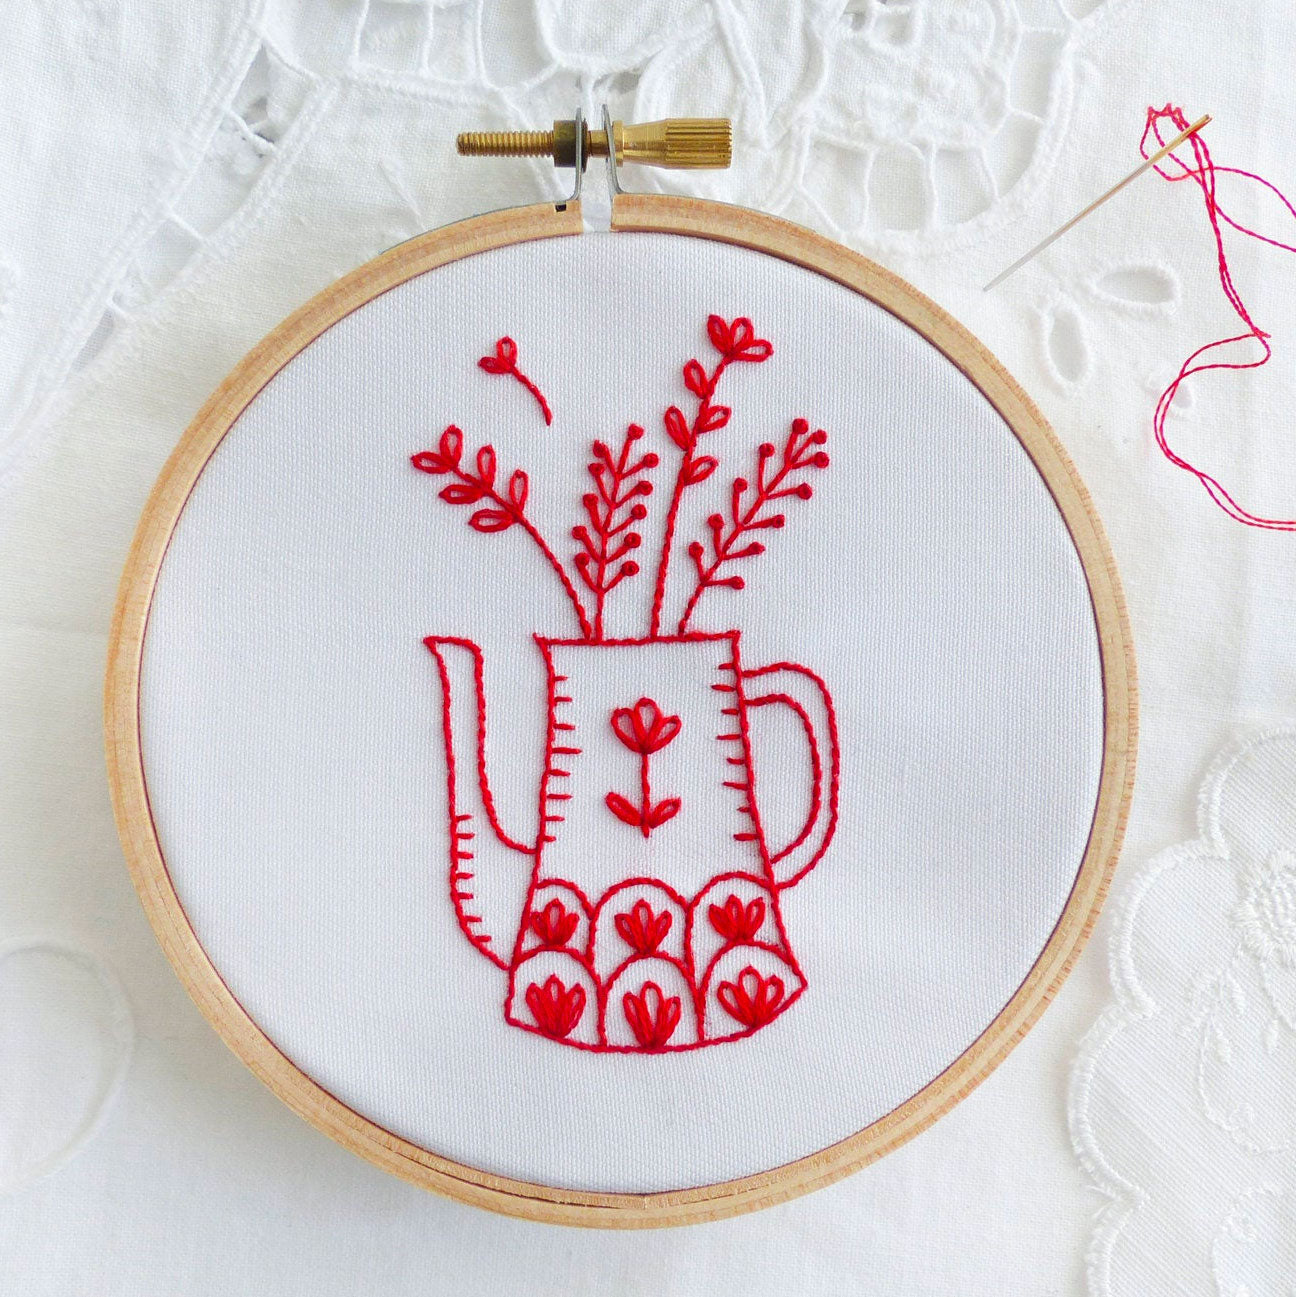 Easy hand embroidery kit, beginner embroidery kit, easy hand